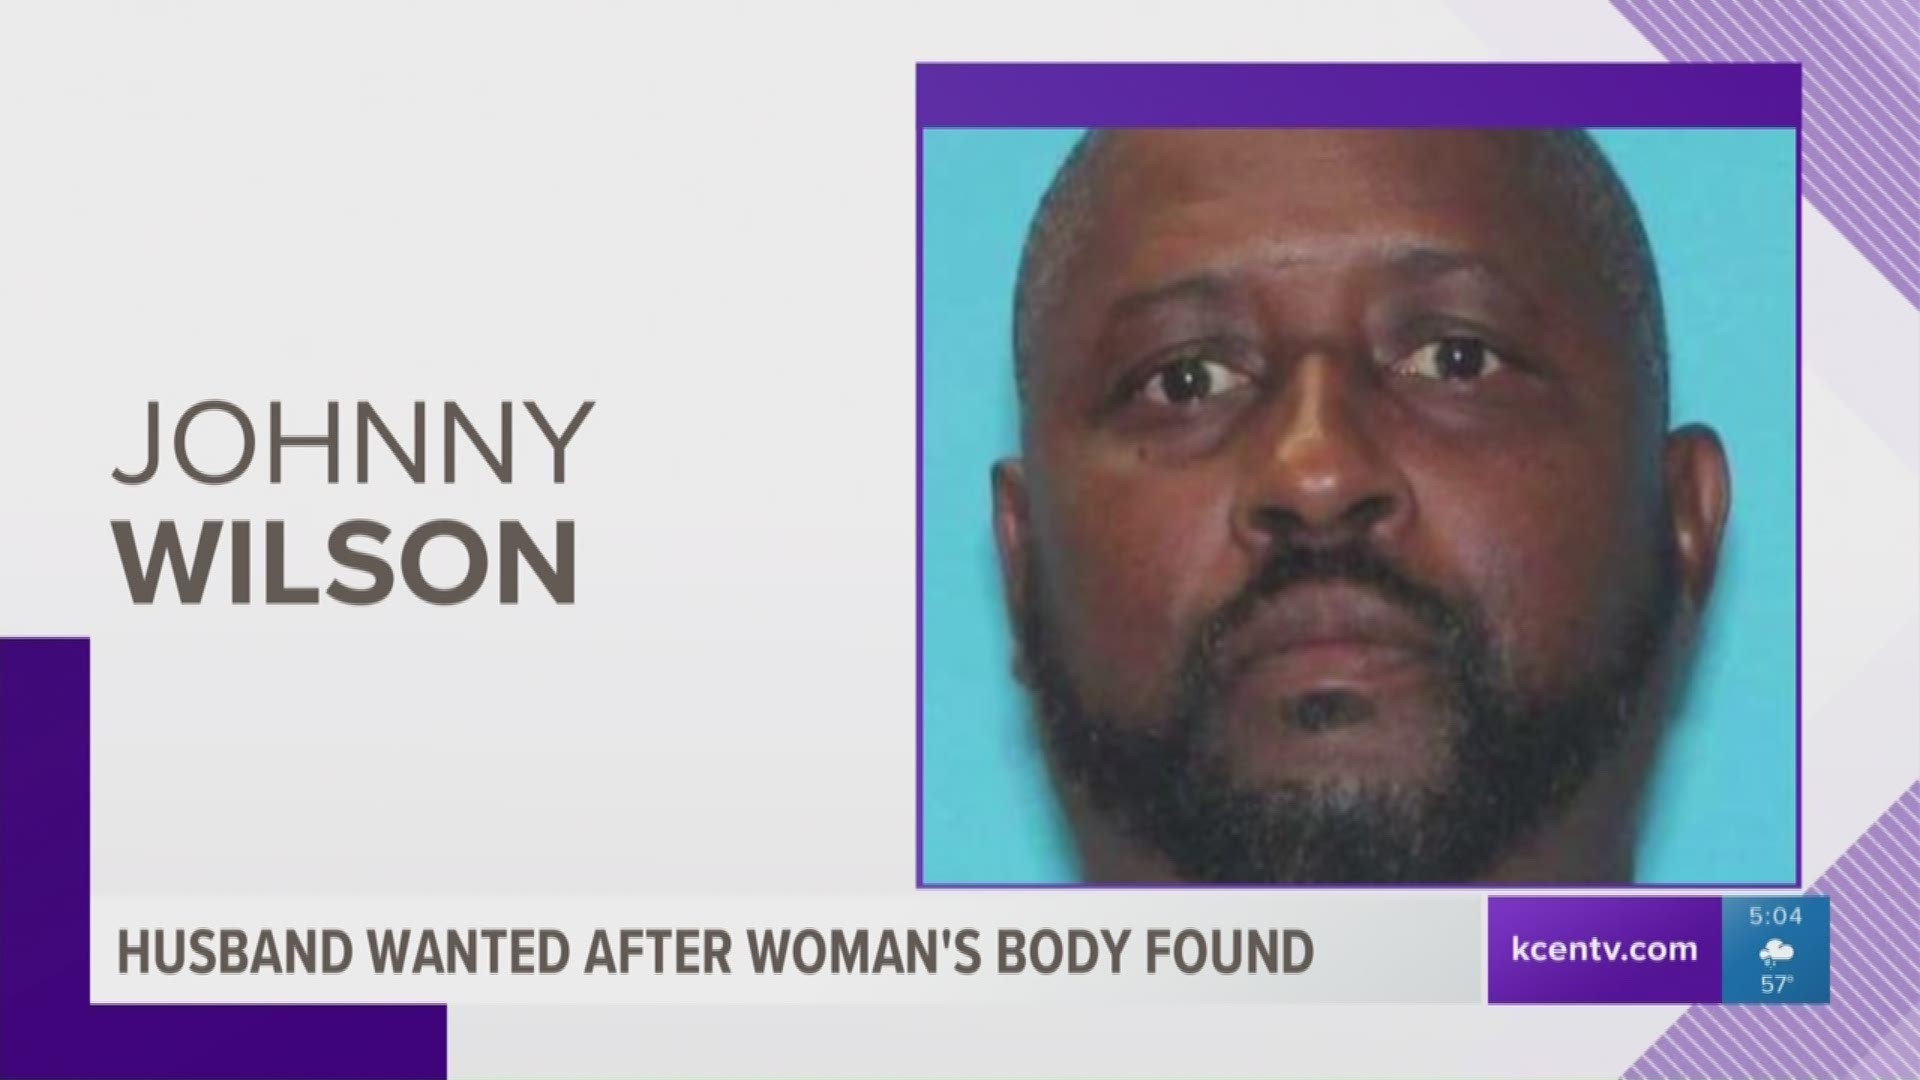 Navarro County Sheriff's officers said the decomposed body of 29-year-old Charine Marie Wilson was found last week, and now officials are searching for her husband in connection to her death.